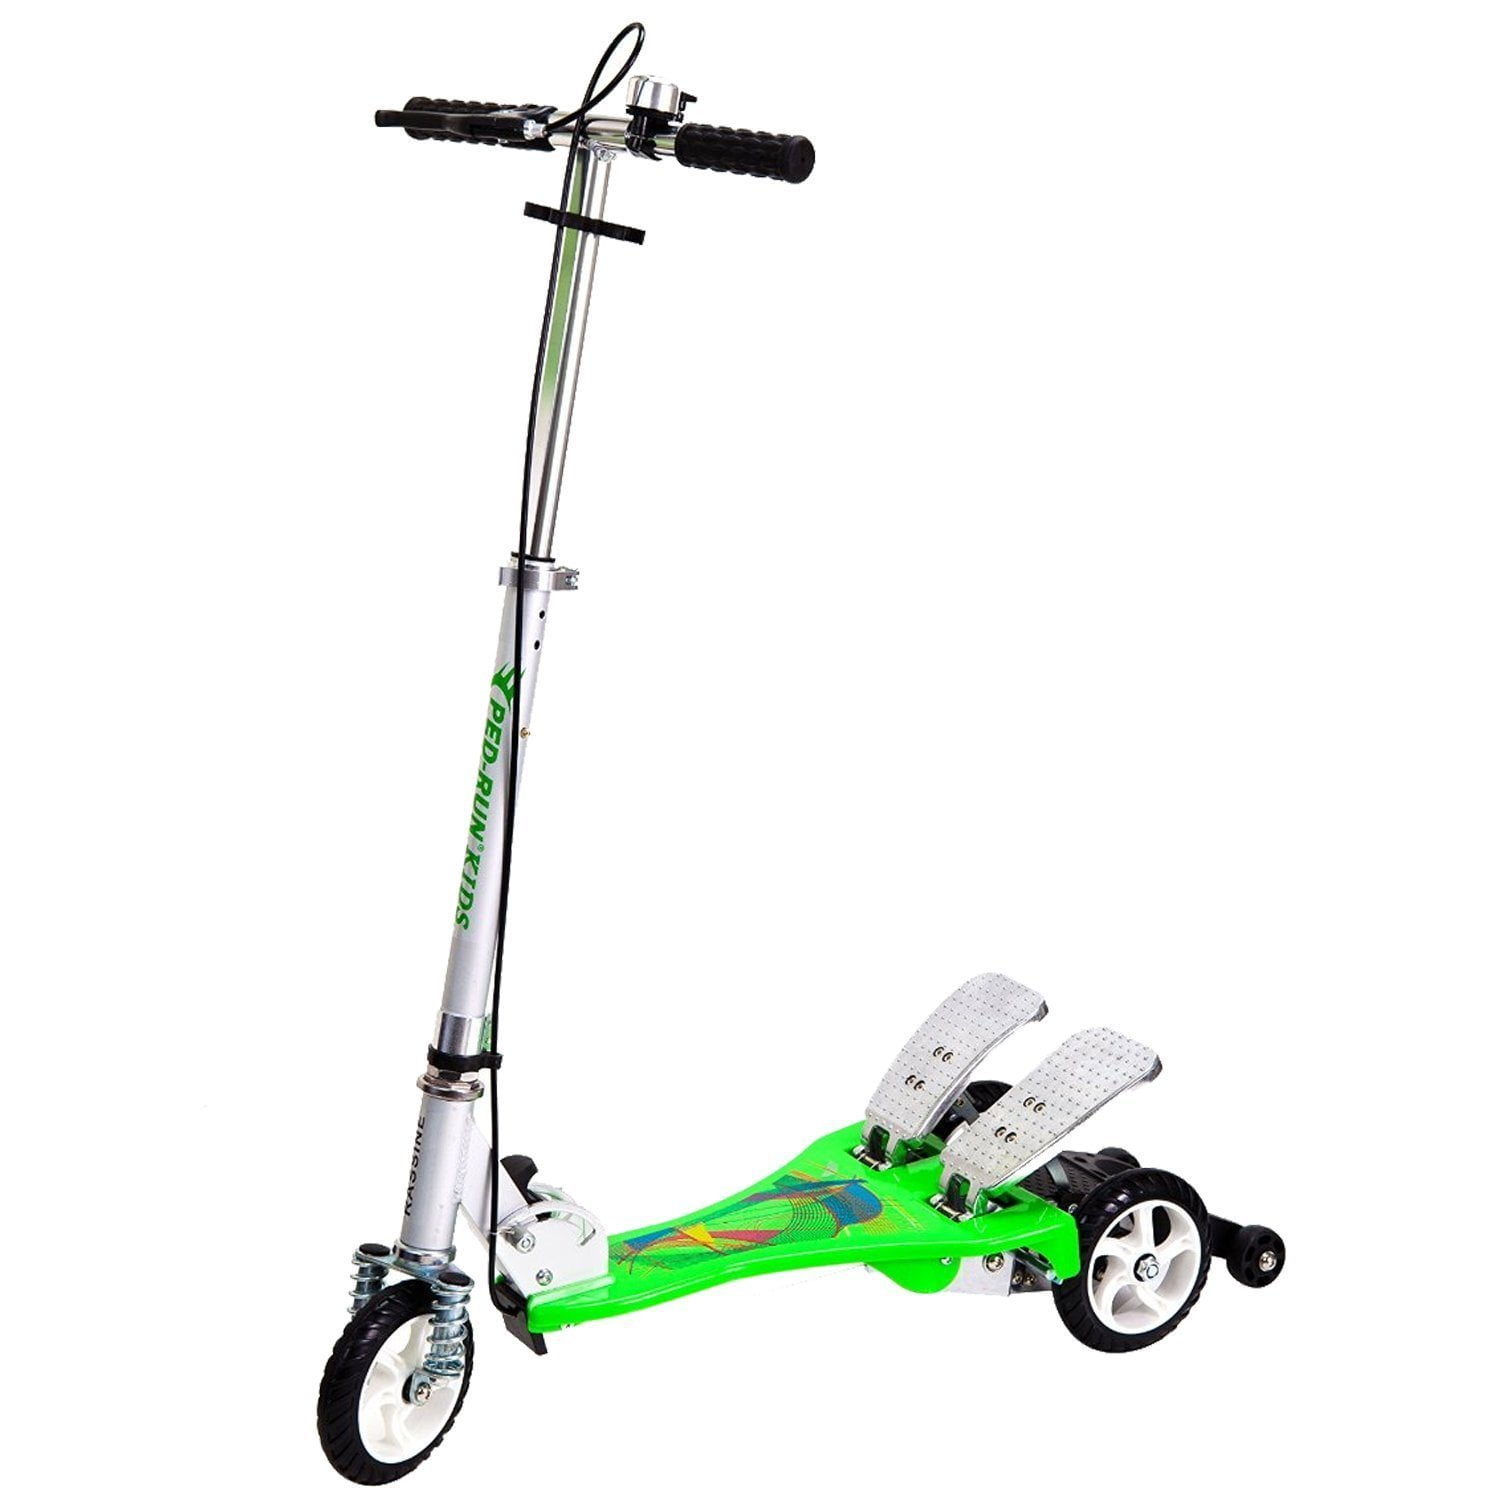 kids green scooter